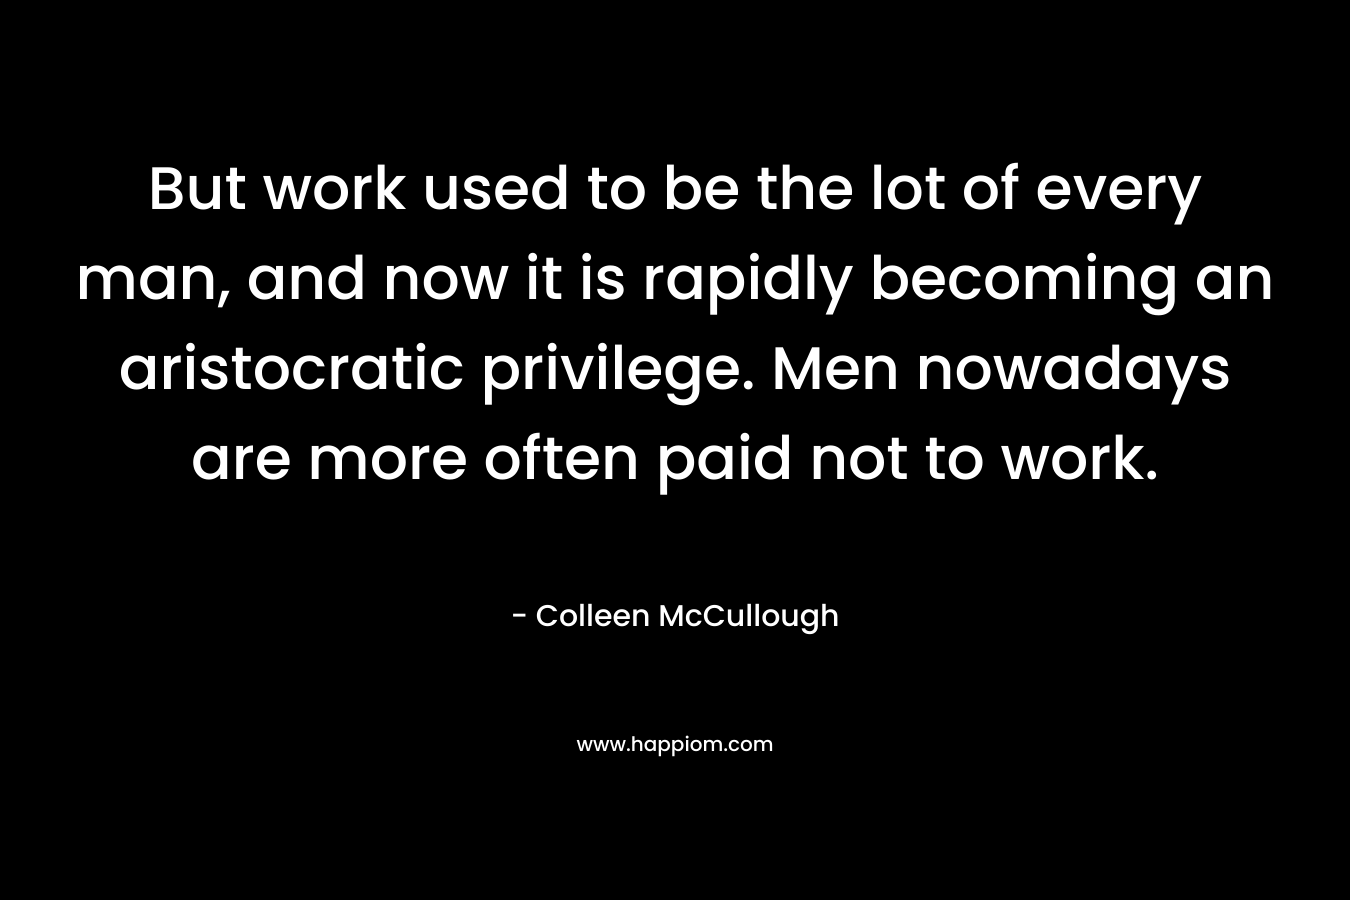 But work used to be the lot of every man, and now it is rapidly becoming an aristocratic privilege. Men nowadays are more often paid not to work. – Colleen McCullough